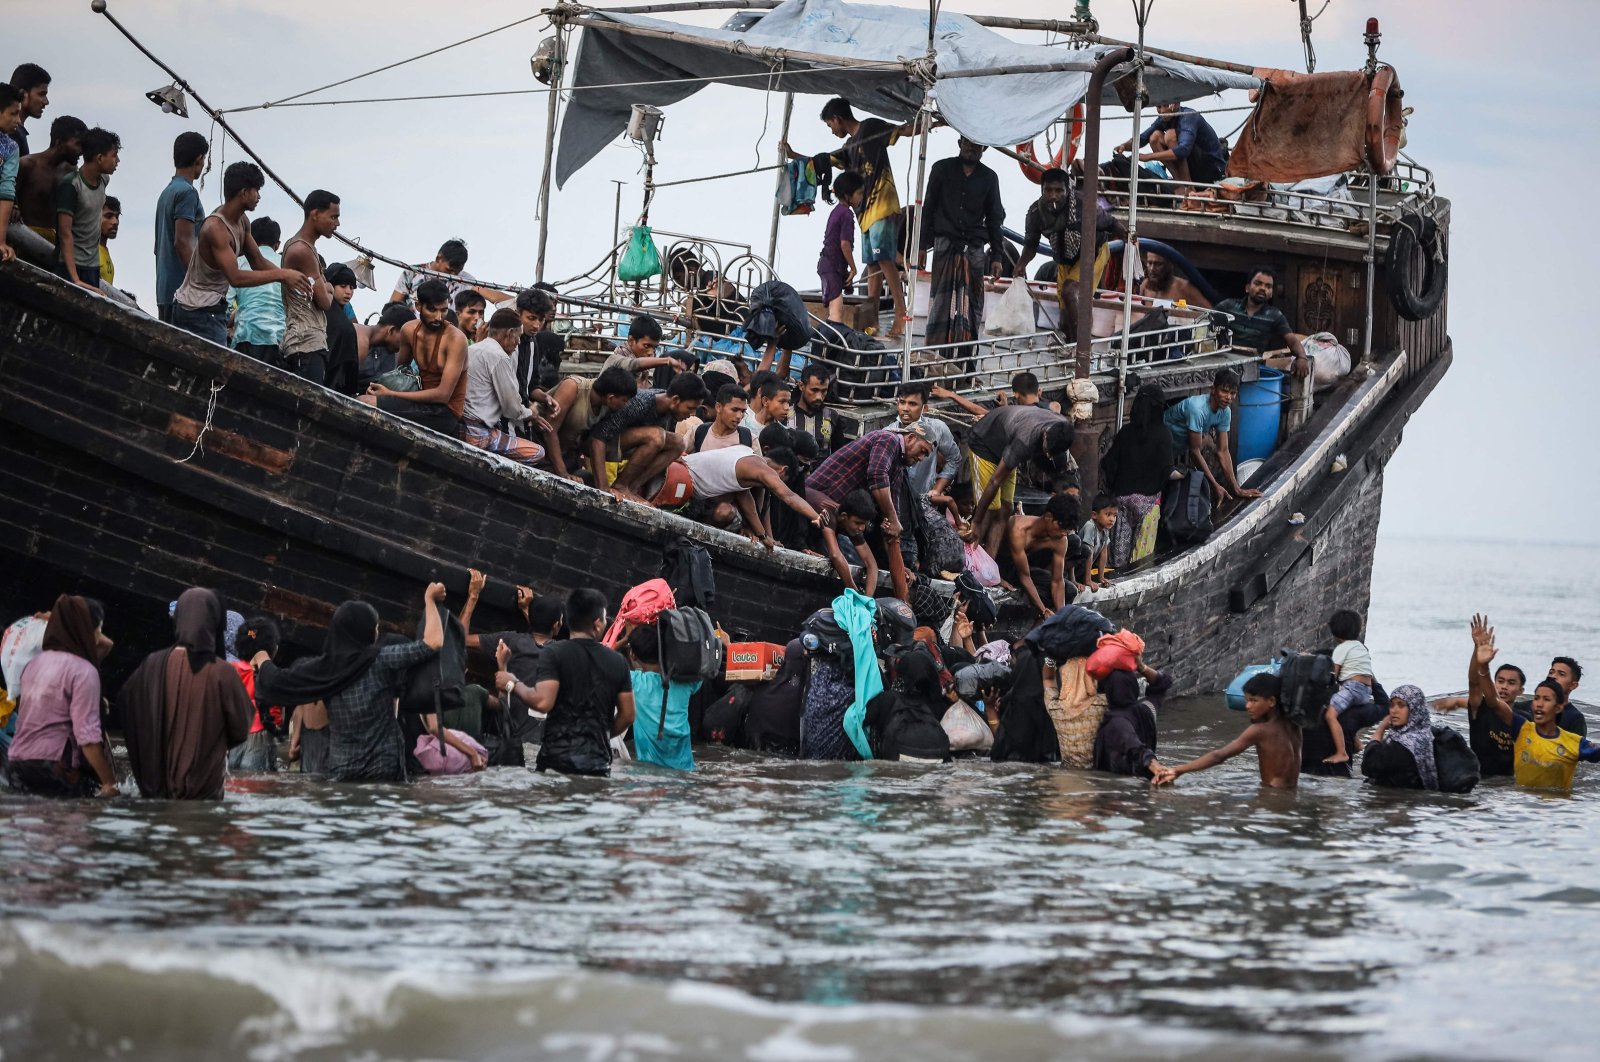  Newly arrived Rohingya refugees return to a boat after the local community decided to temporarily allow them to land for water and food in Ulee Madon, Aceh province, Indonesia, on Nov. 16, 2023. (AFP File Photo)